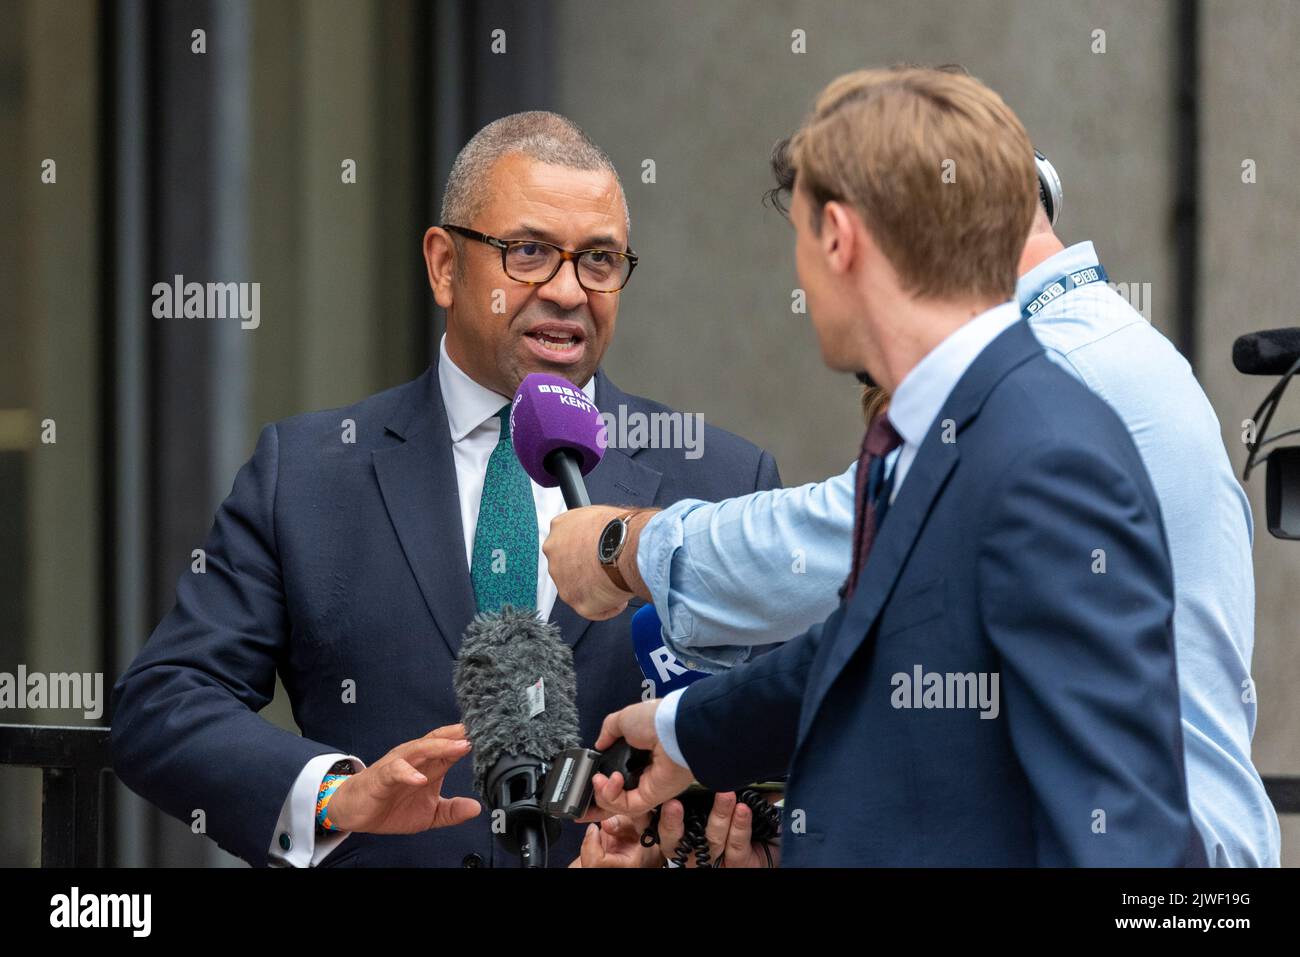 MP James Cleverly after the selection of the new Conservative party leader and new Prime Minister, outside the Queen Elizabeth II Centre, London, UK Stock Photo